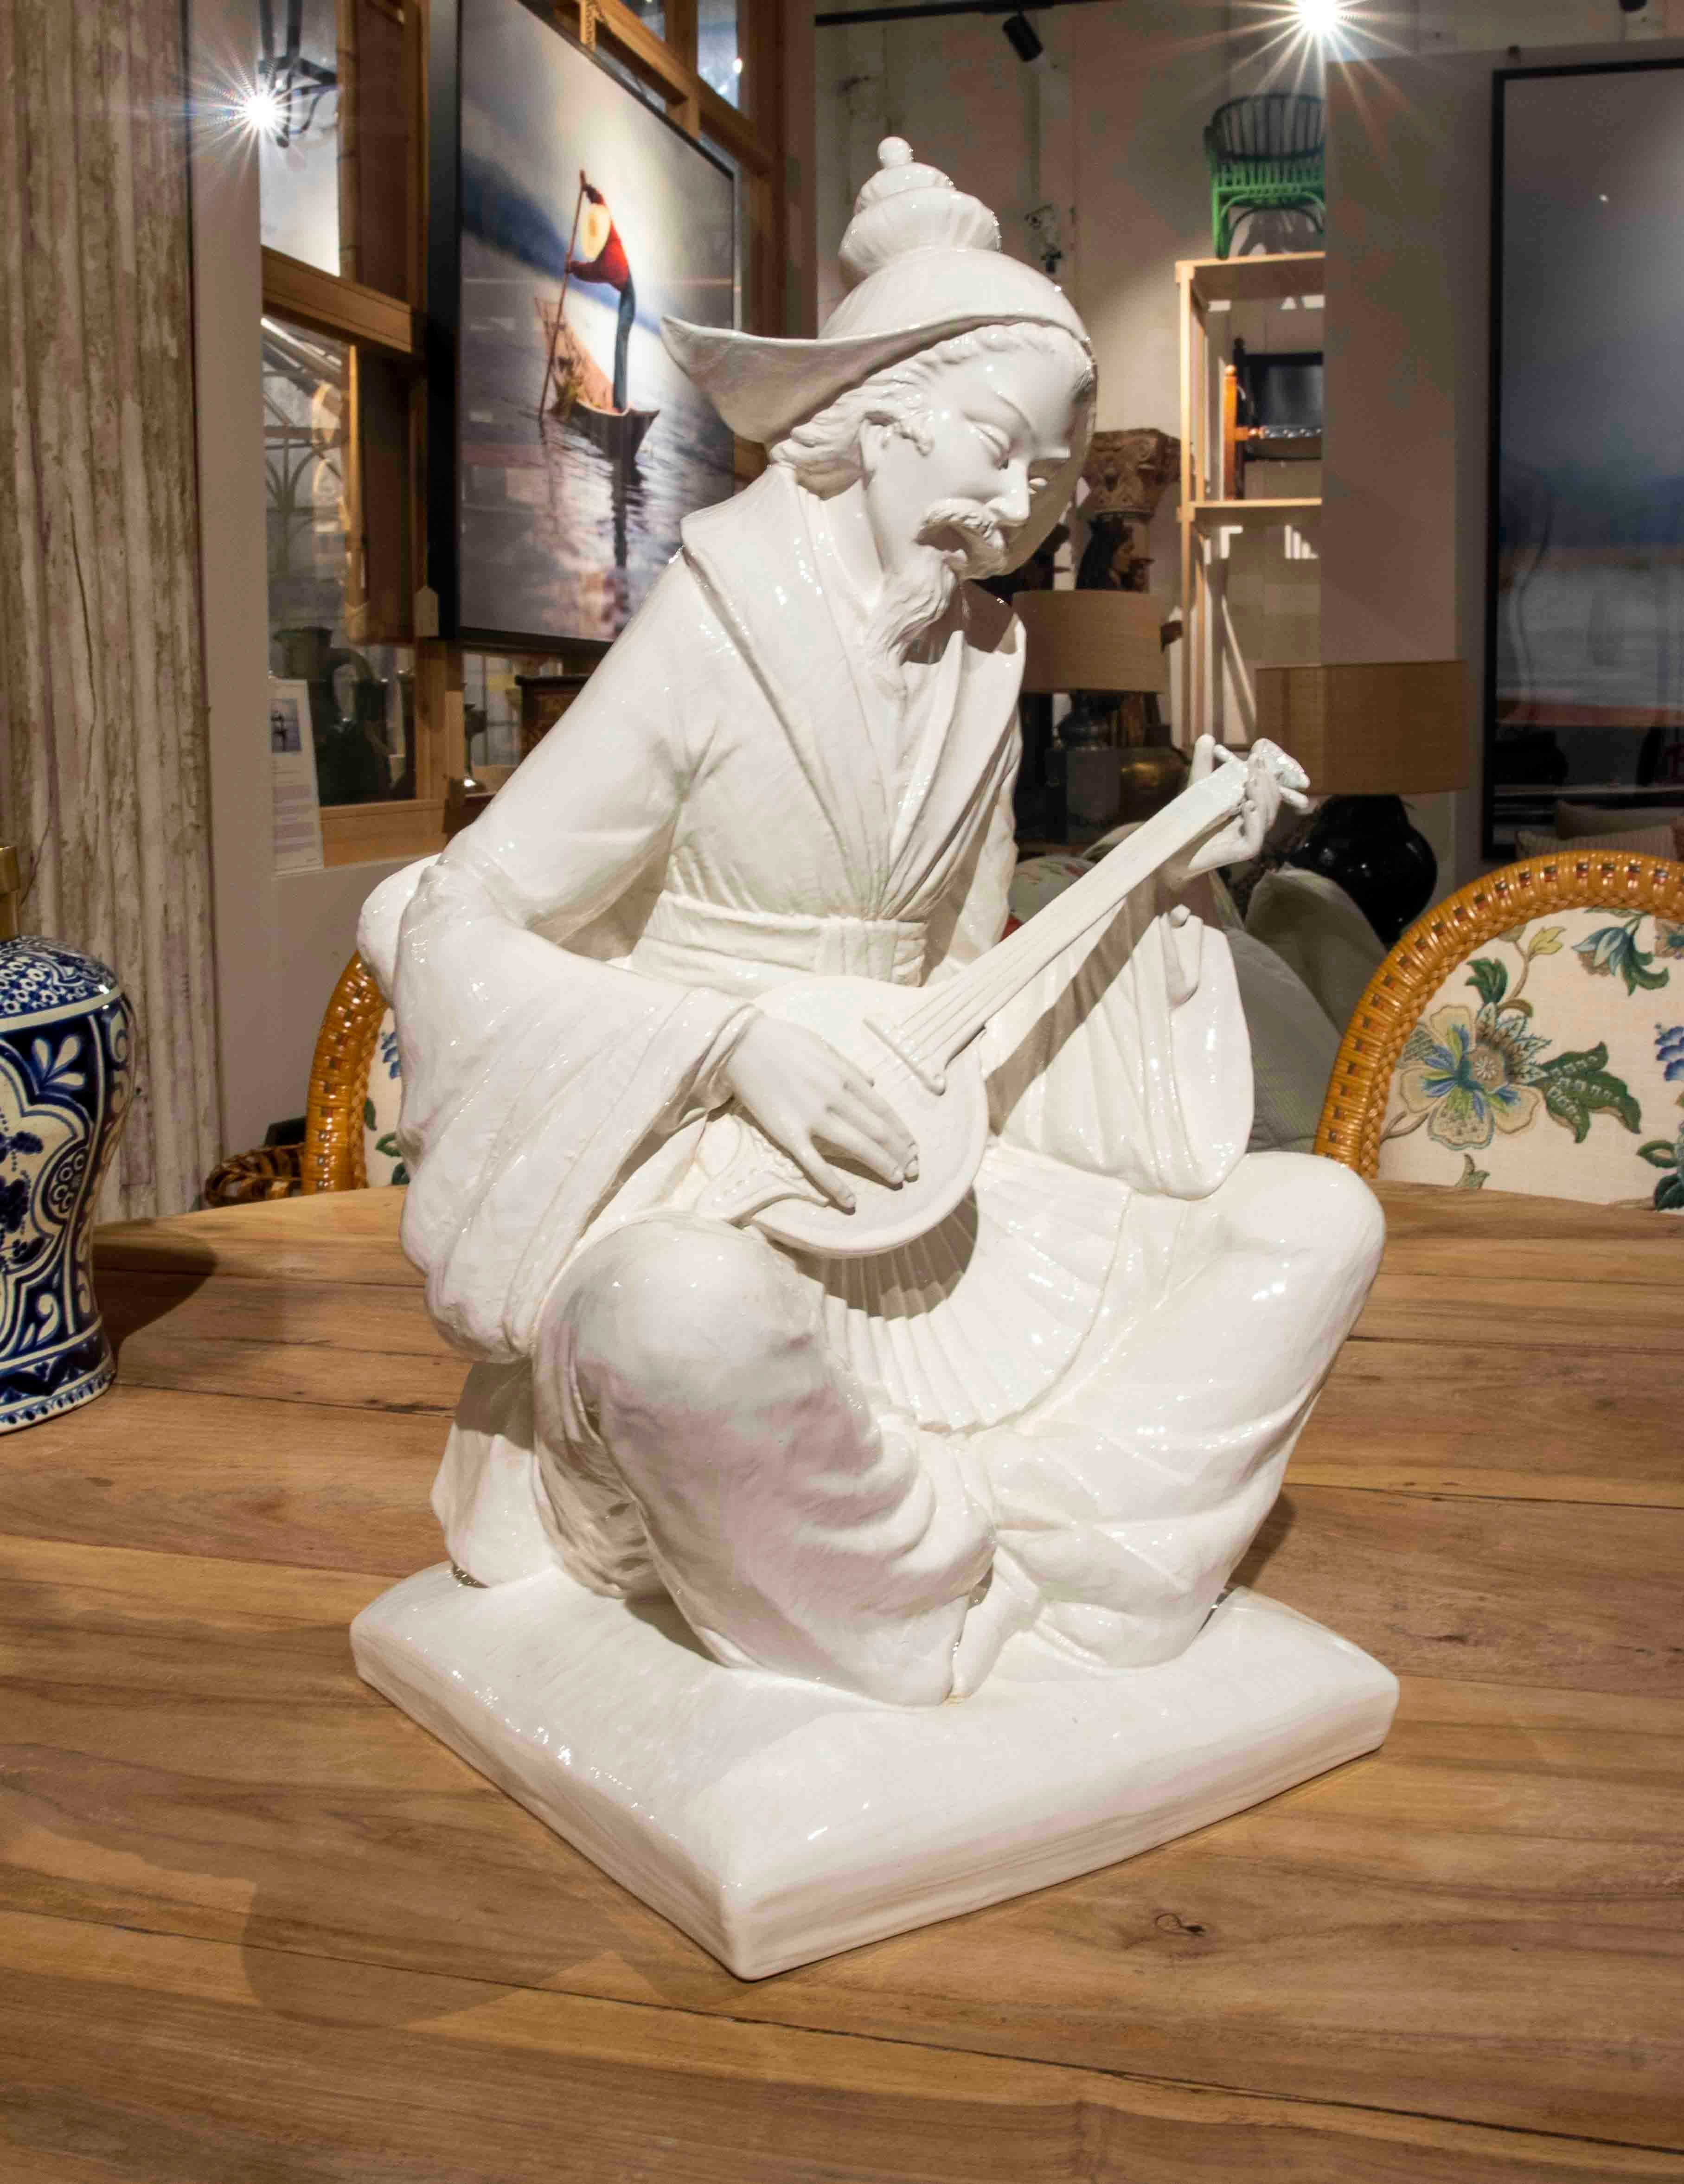 White Glazed Ceramic Figure of an Oriental Character with a Musical Instrument